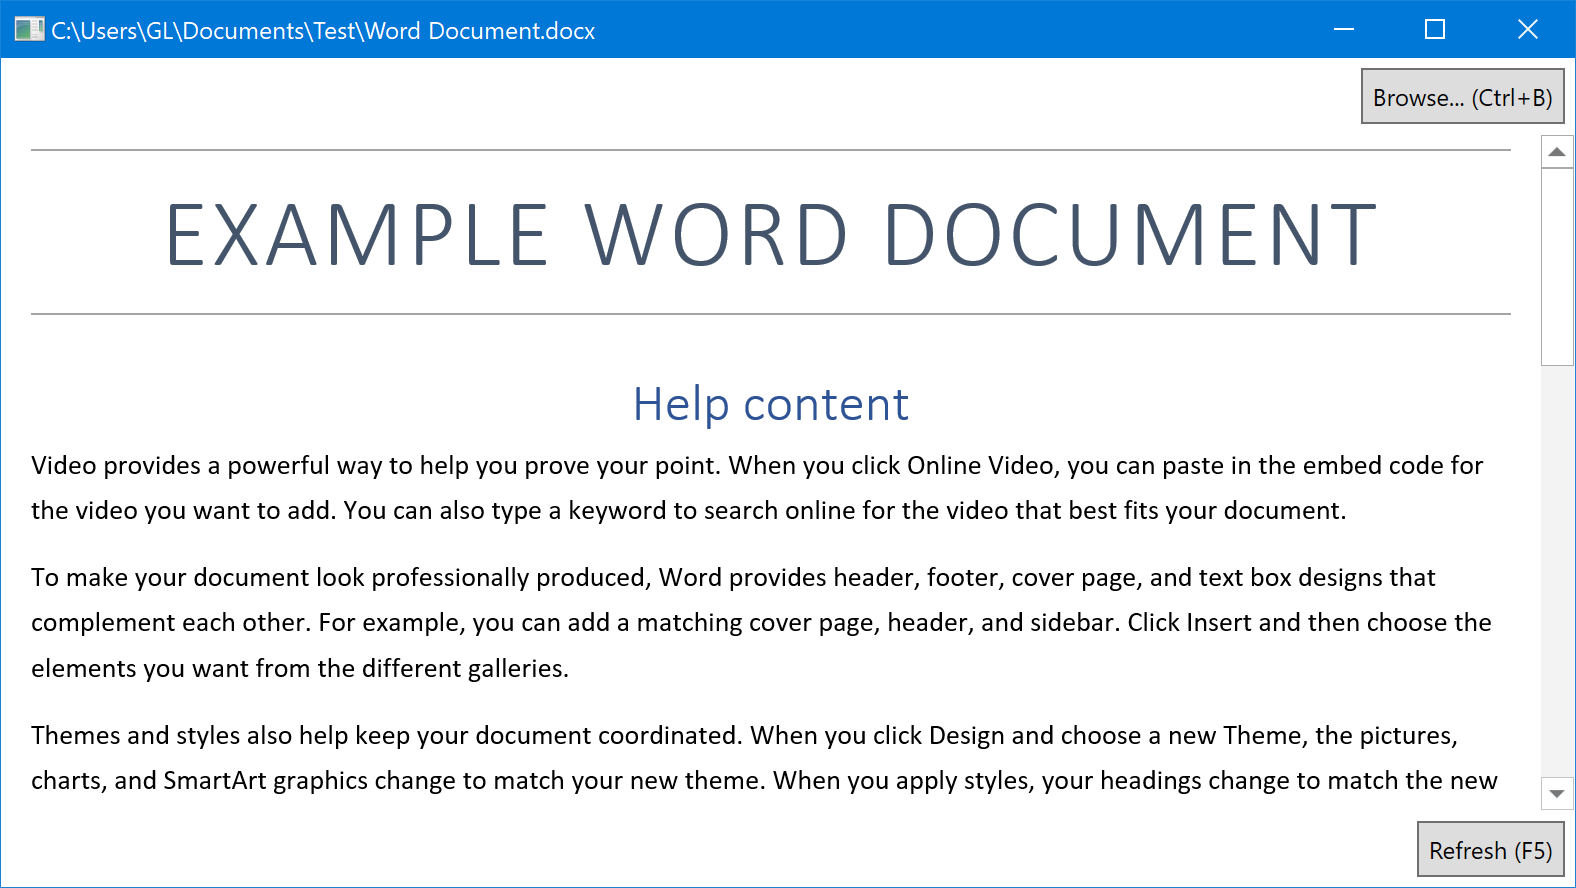 Microsoft Word previewer, resized